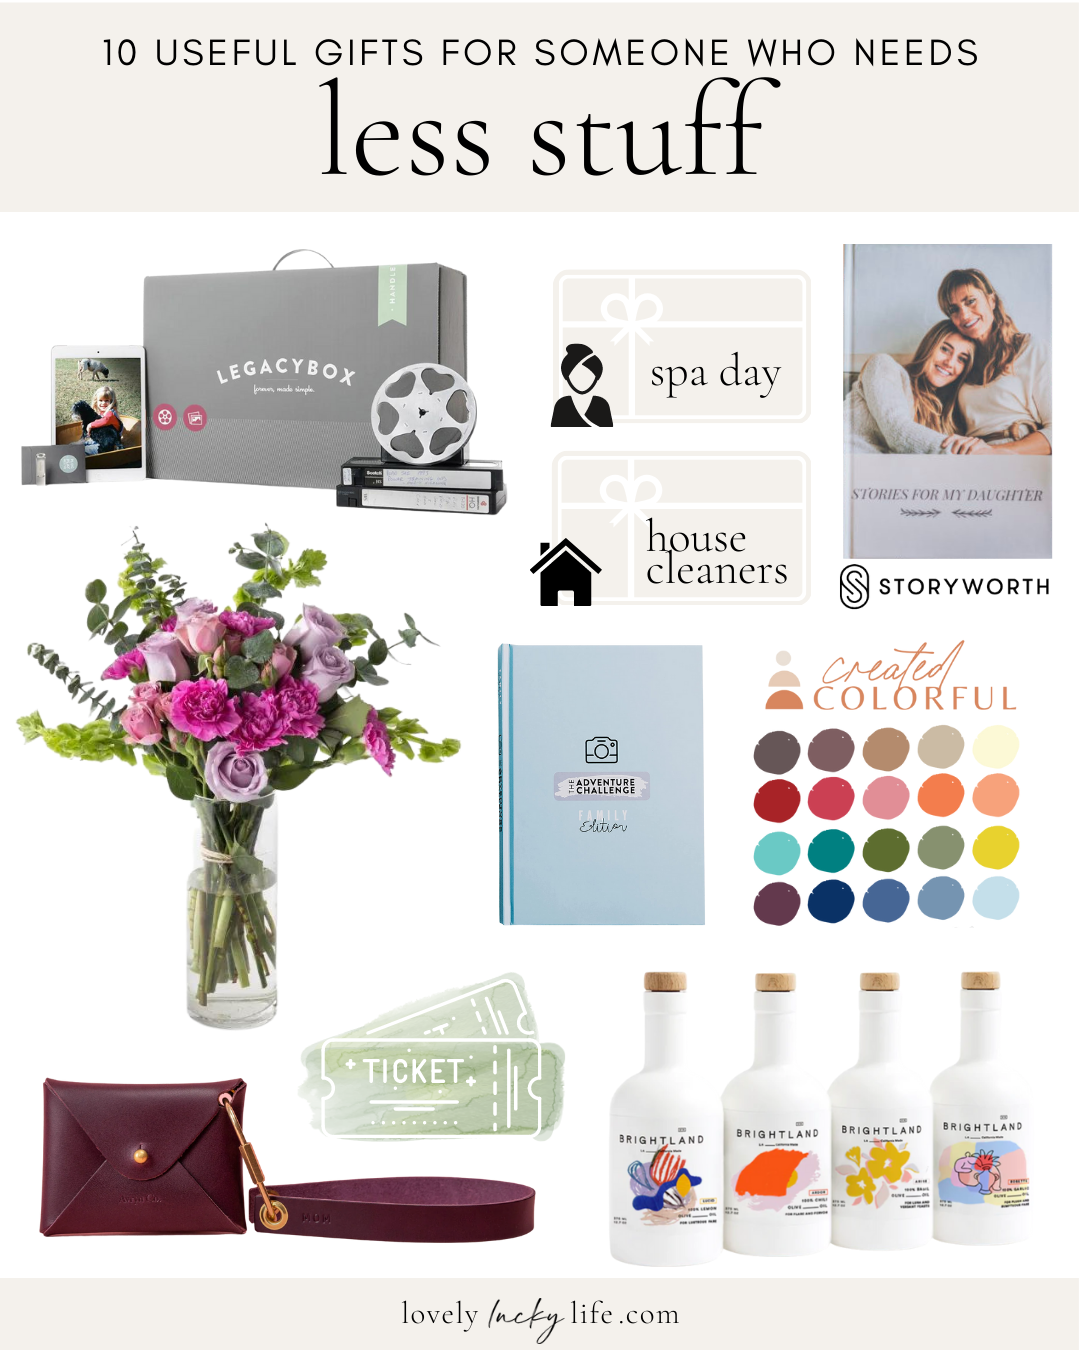 105 of the Best Mom or Mother-in-Law Gift Ideas - Lovely Lucky Life